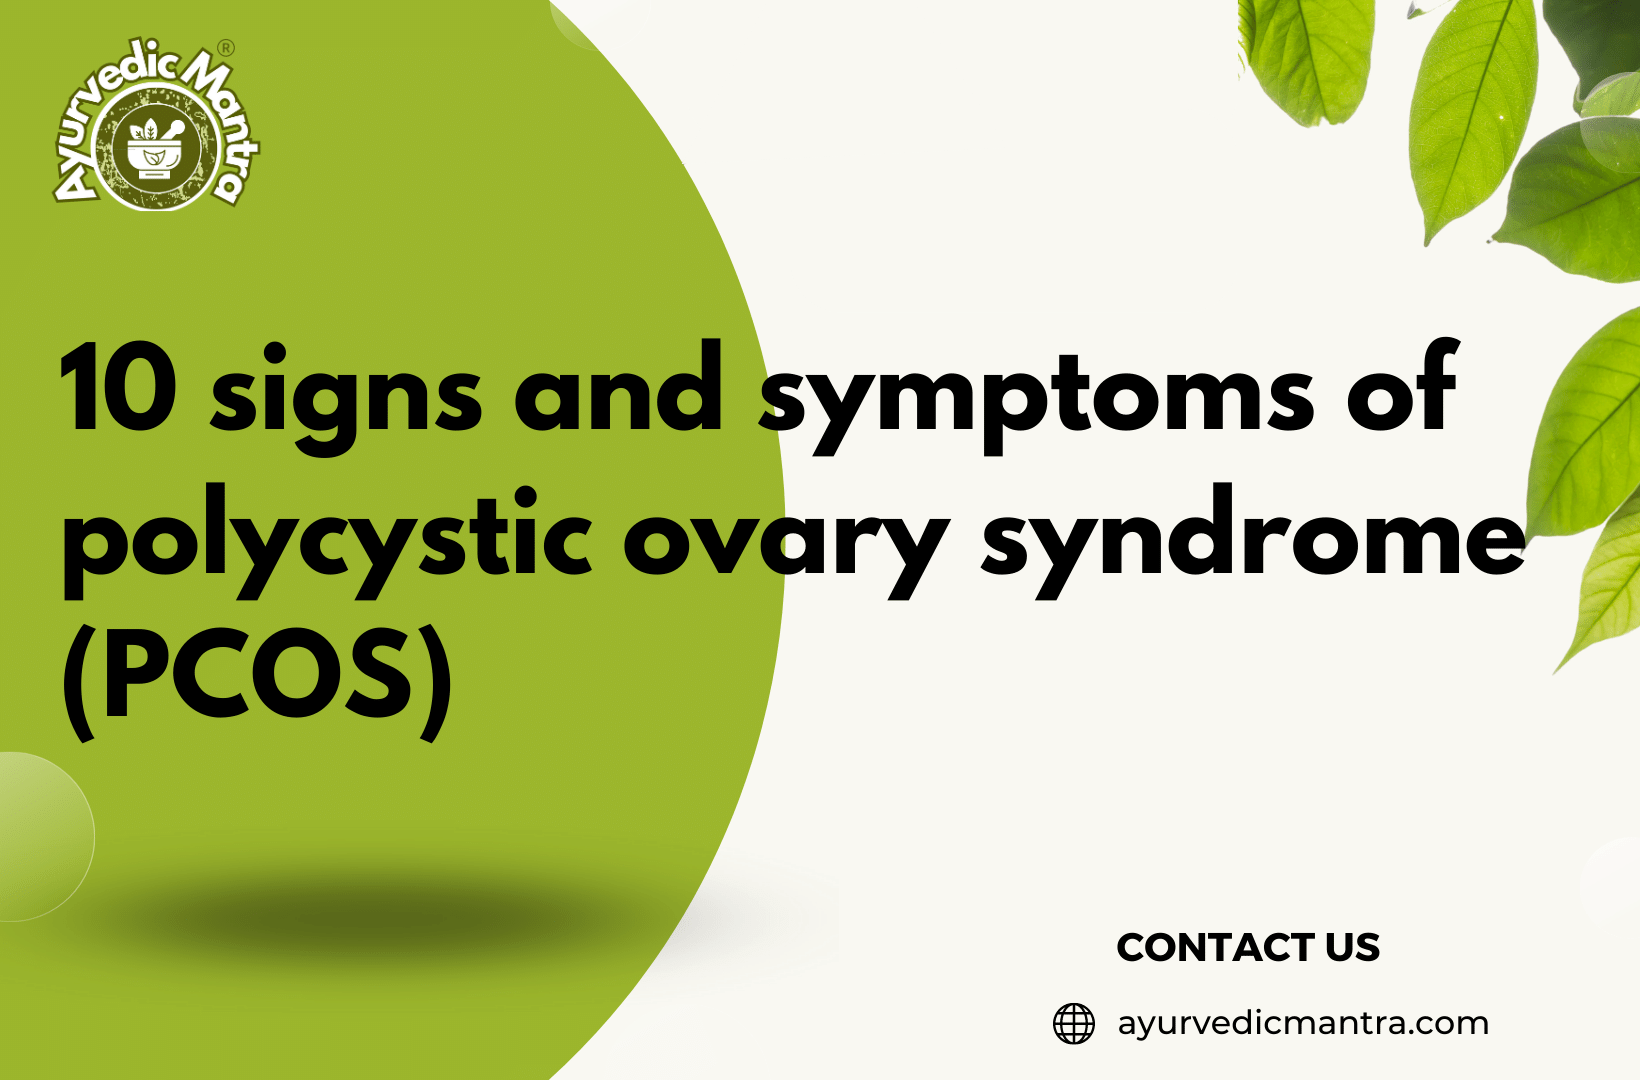 10 signs and symptoms of polycystic ovary syndrome (PCOS)